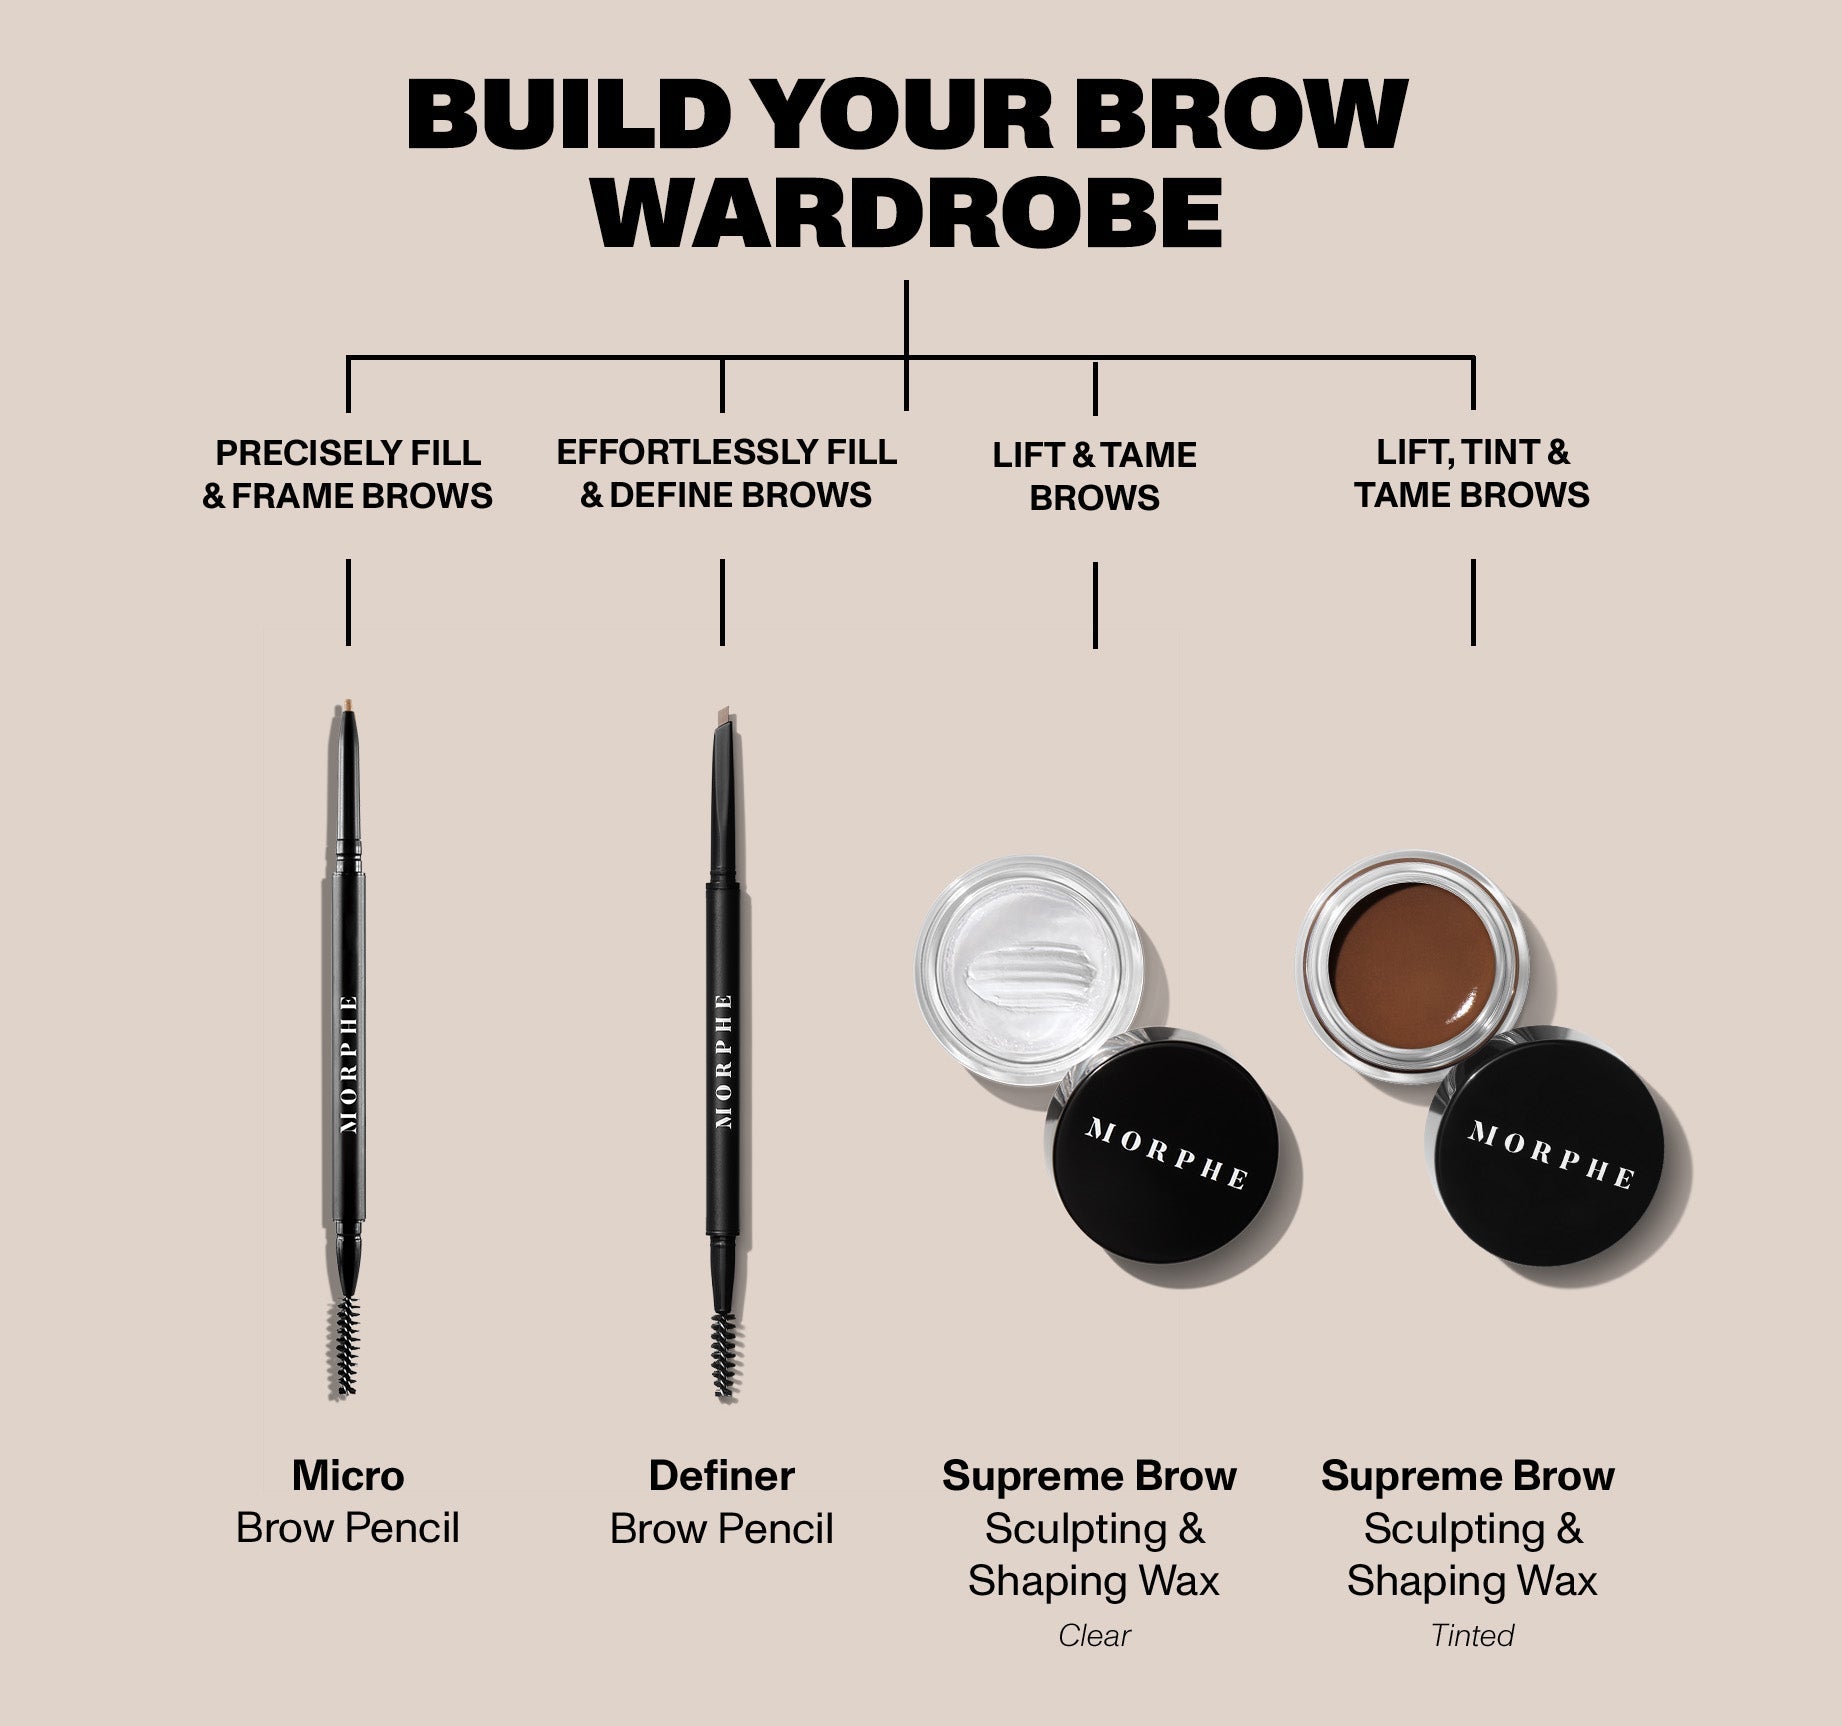 Supreme Brow Sculpting And Shaping Wax - Latte - Image 9